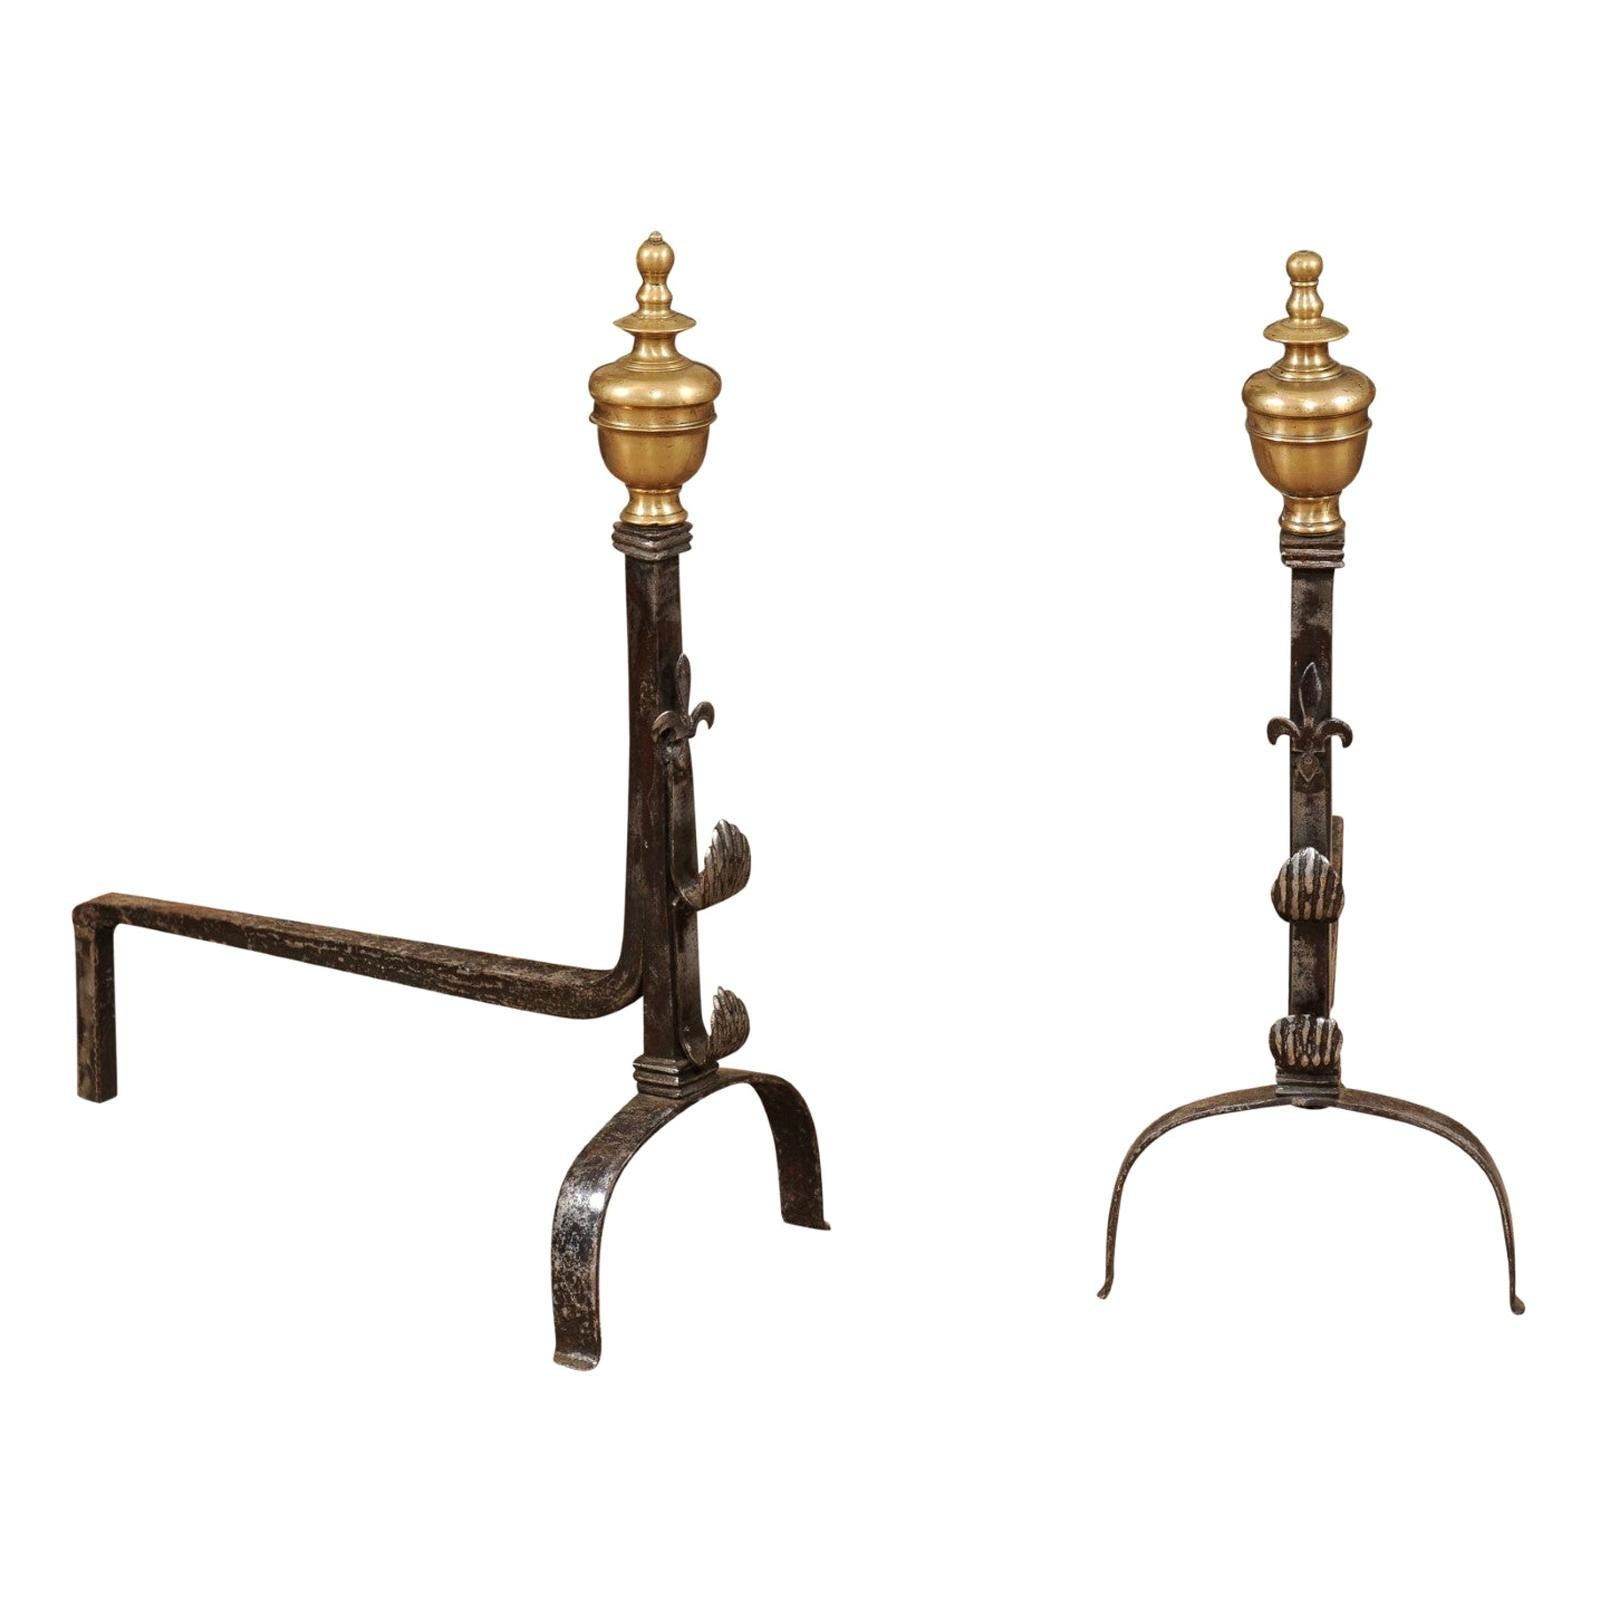 Pair of Iron & Brass Andirons with Fleurs de Lis, France, 18th Century